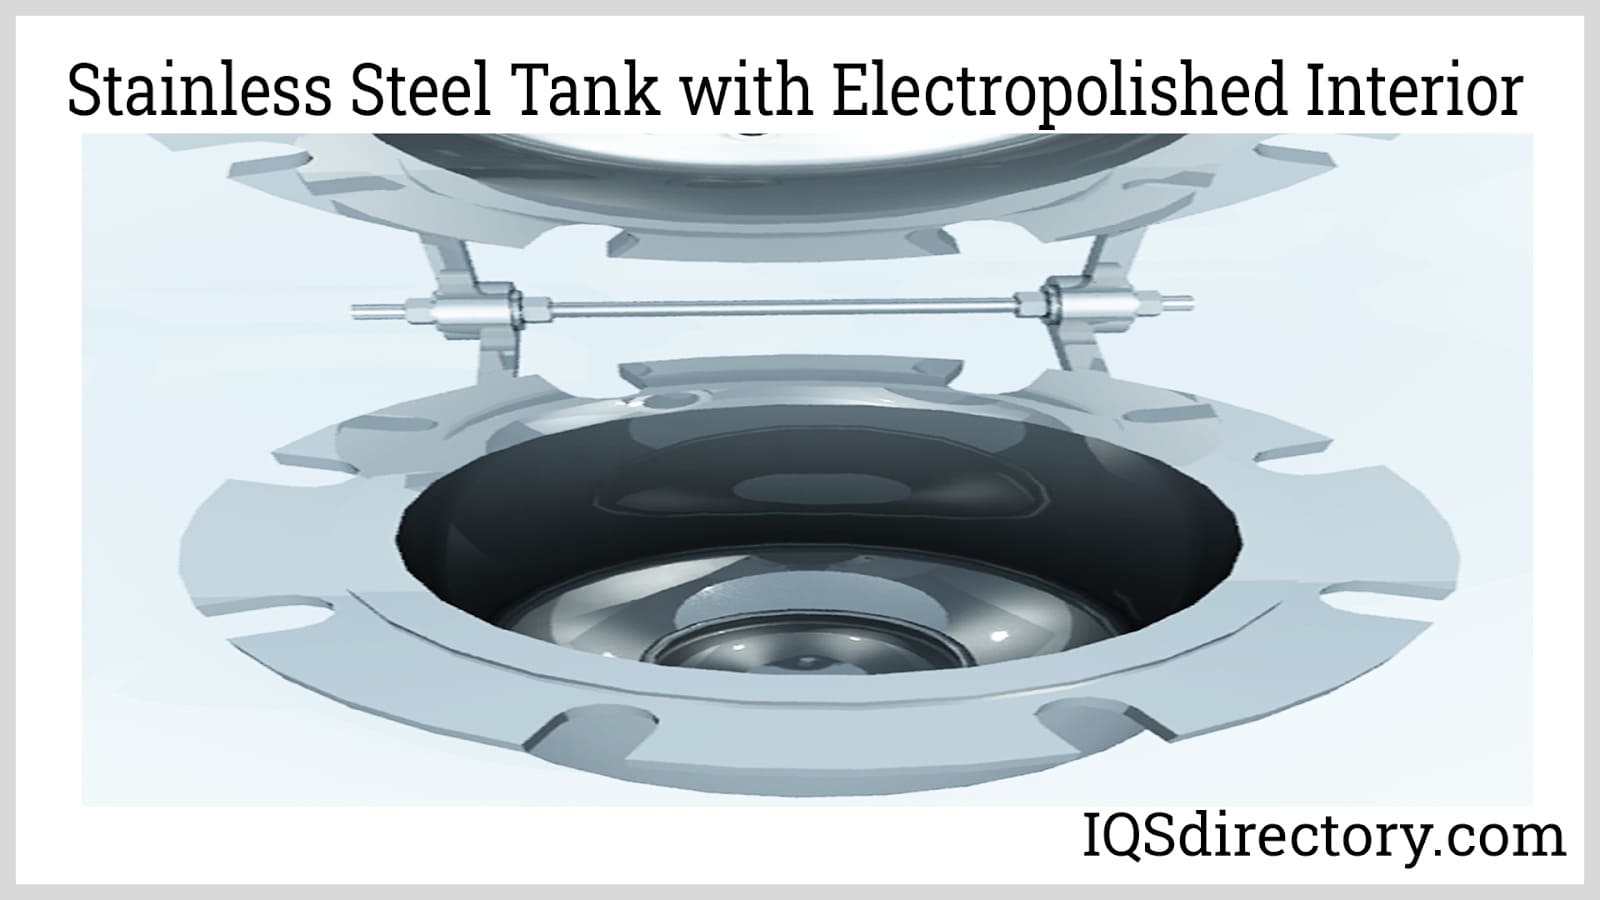 Stainless Steel Tank with Electropolished Interior